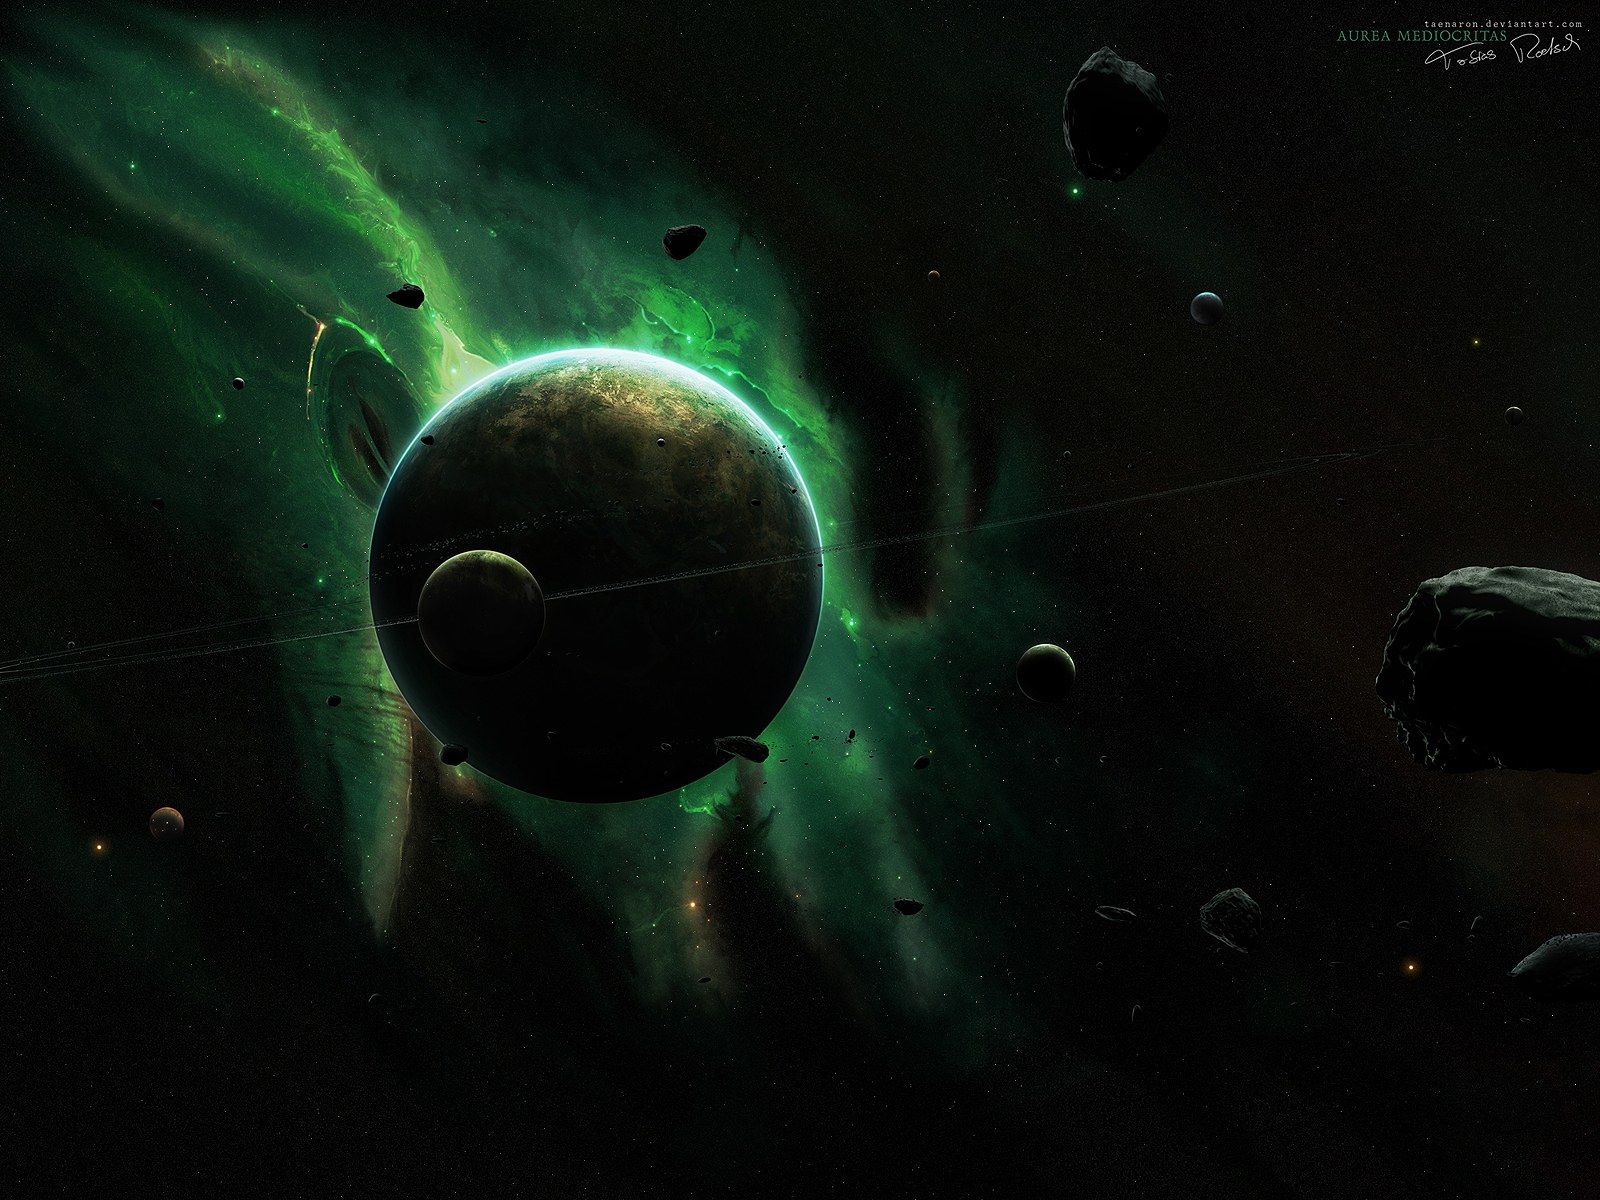 HD universe and planets digital art wallpapers 1600x1200 NO.21 ...